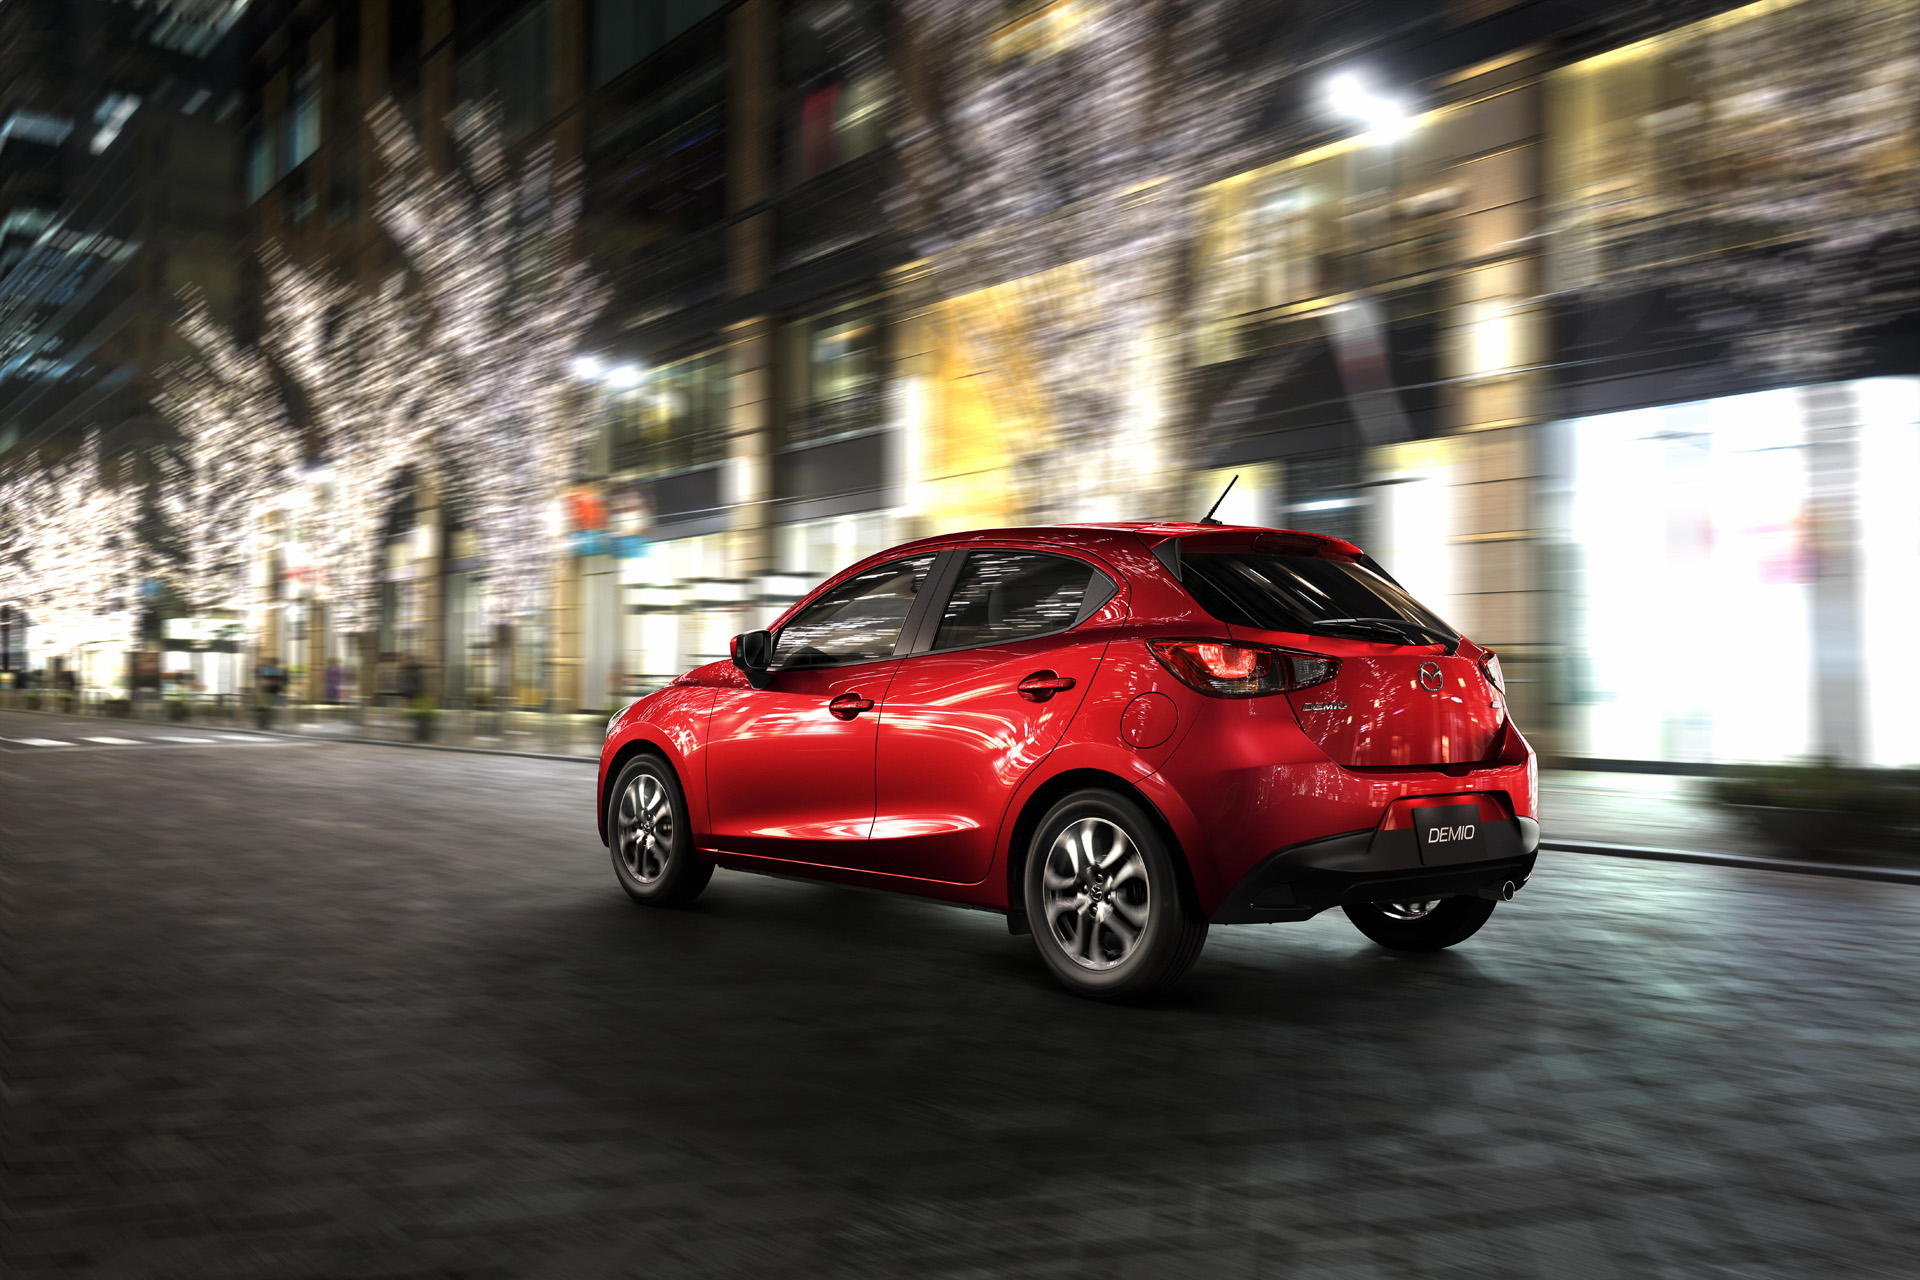 2015 Mazda2 Finally Gets Its Official Debut - autoevolution